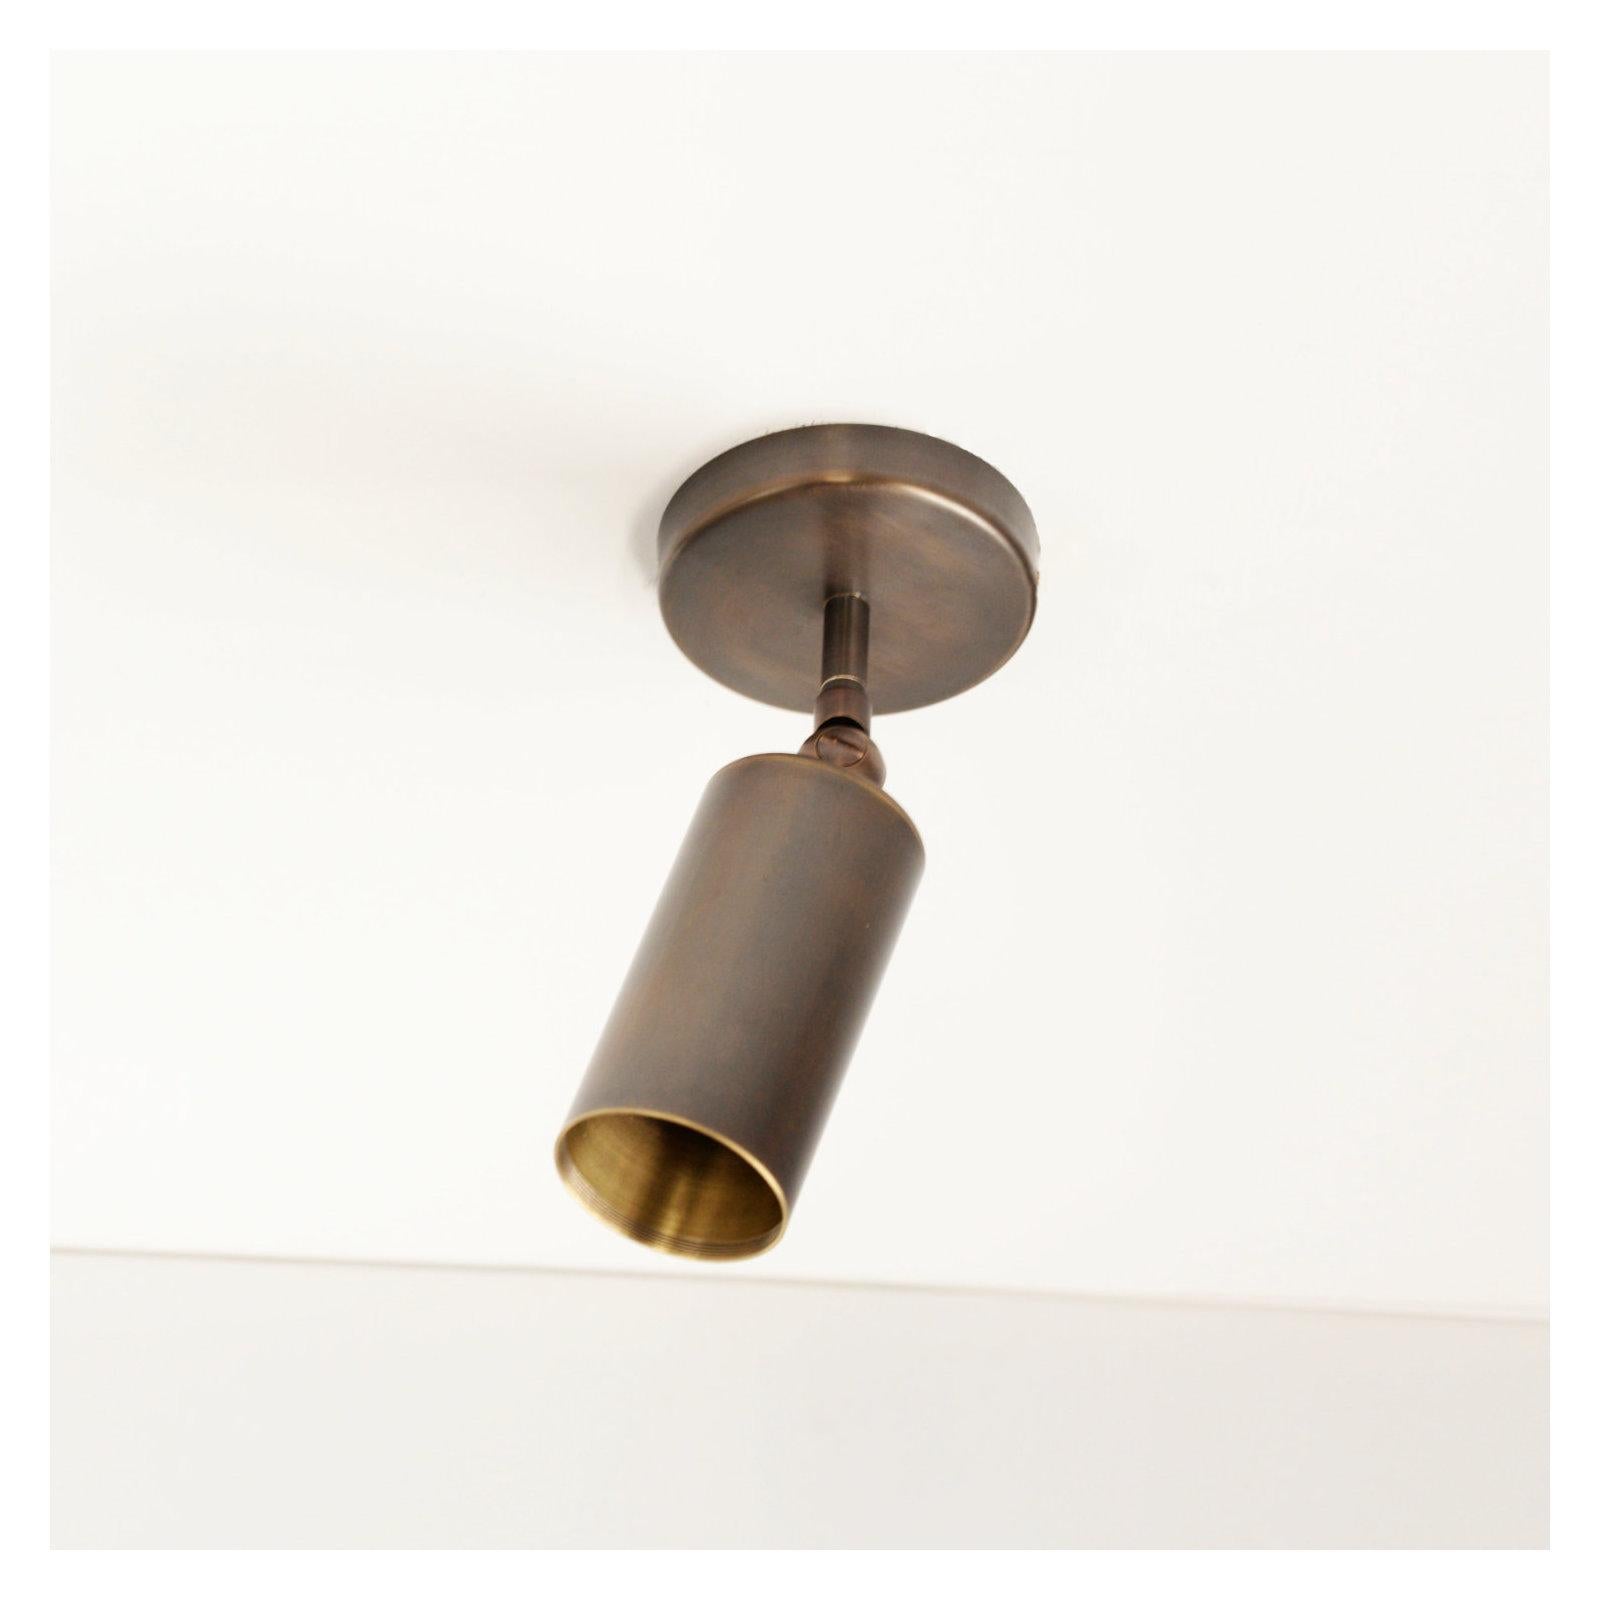 The VIDERE wall light has been designed to provide functional task illumination, from an exquisitely hand-burnished wall light.

The tiltable body is perfect for illuminating bedsides, artwork and hallways.

The VIDERE wall light features: •